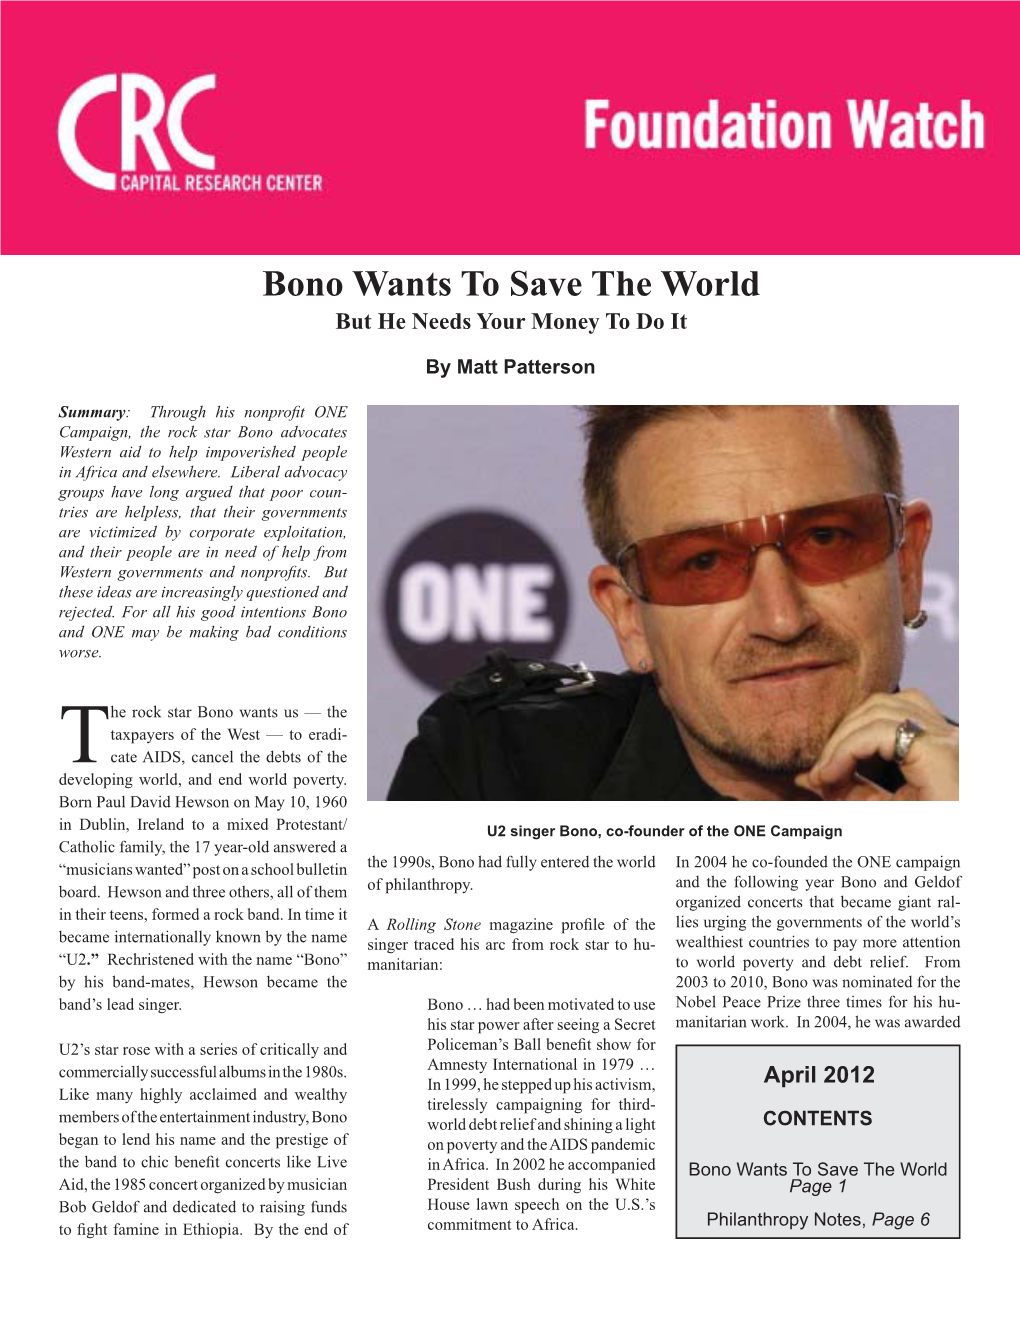 Bono Wants to Save the World but He Needs Your Money to Do It